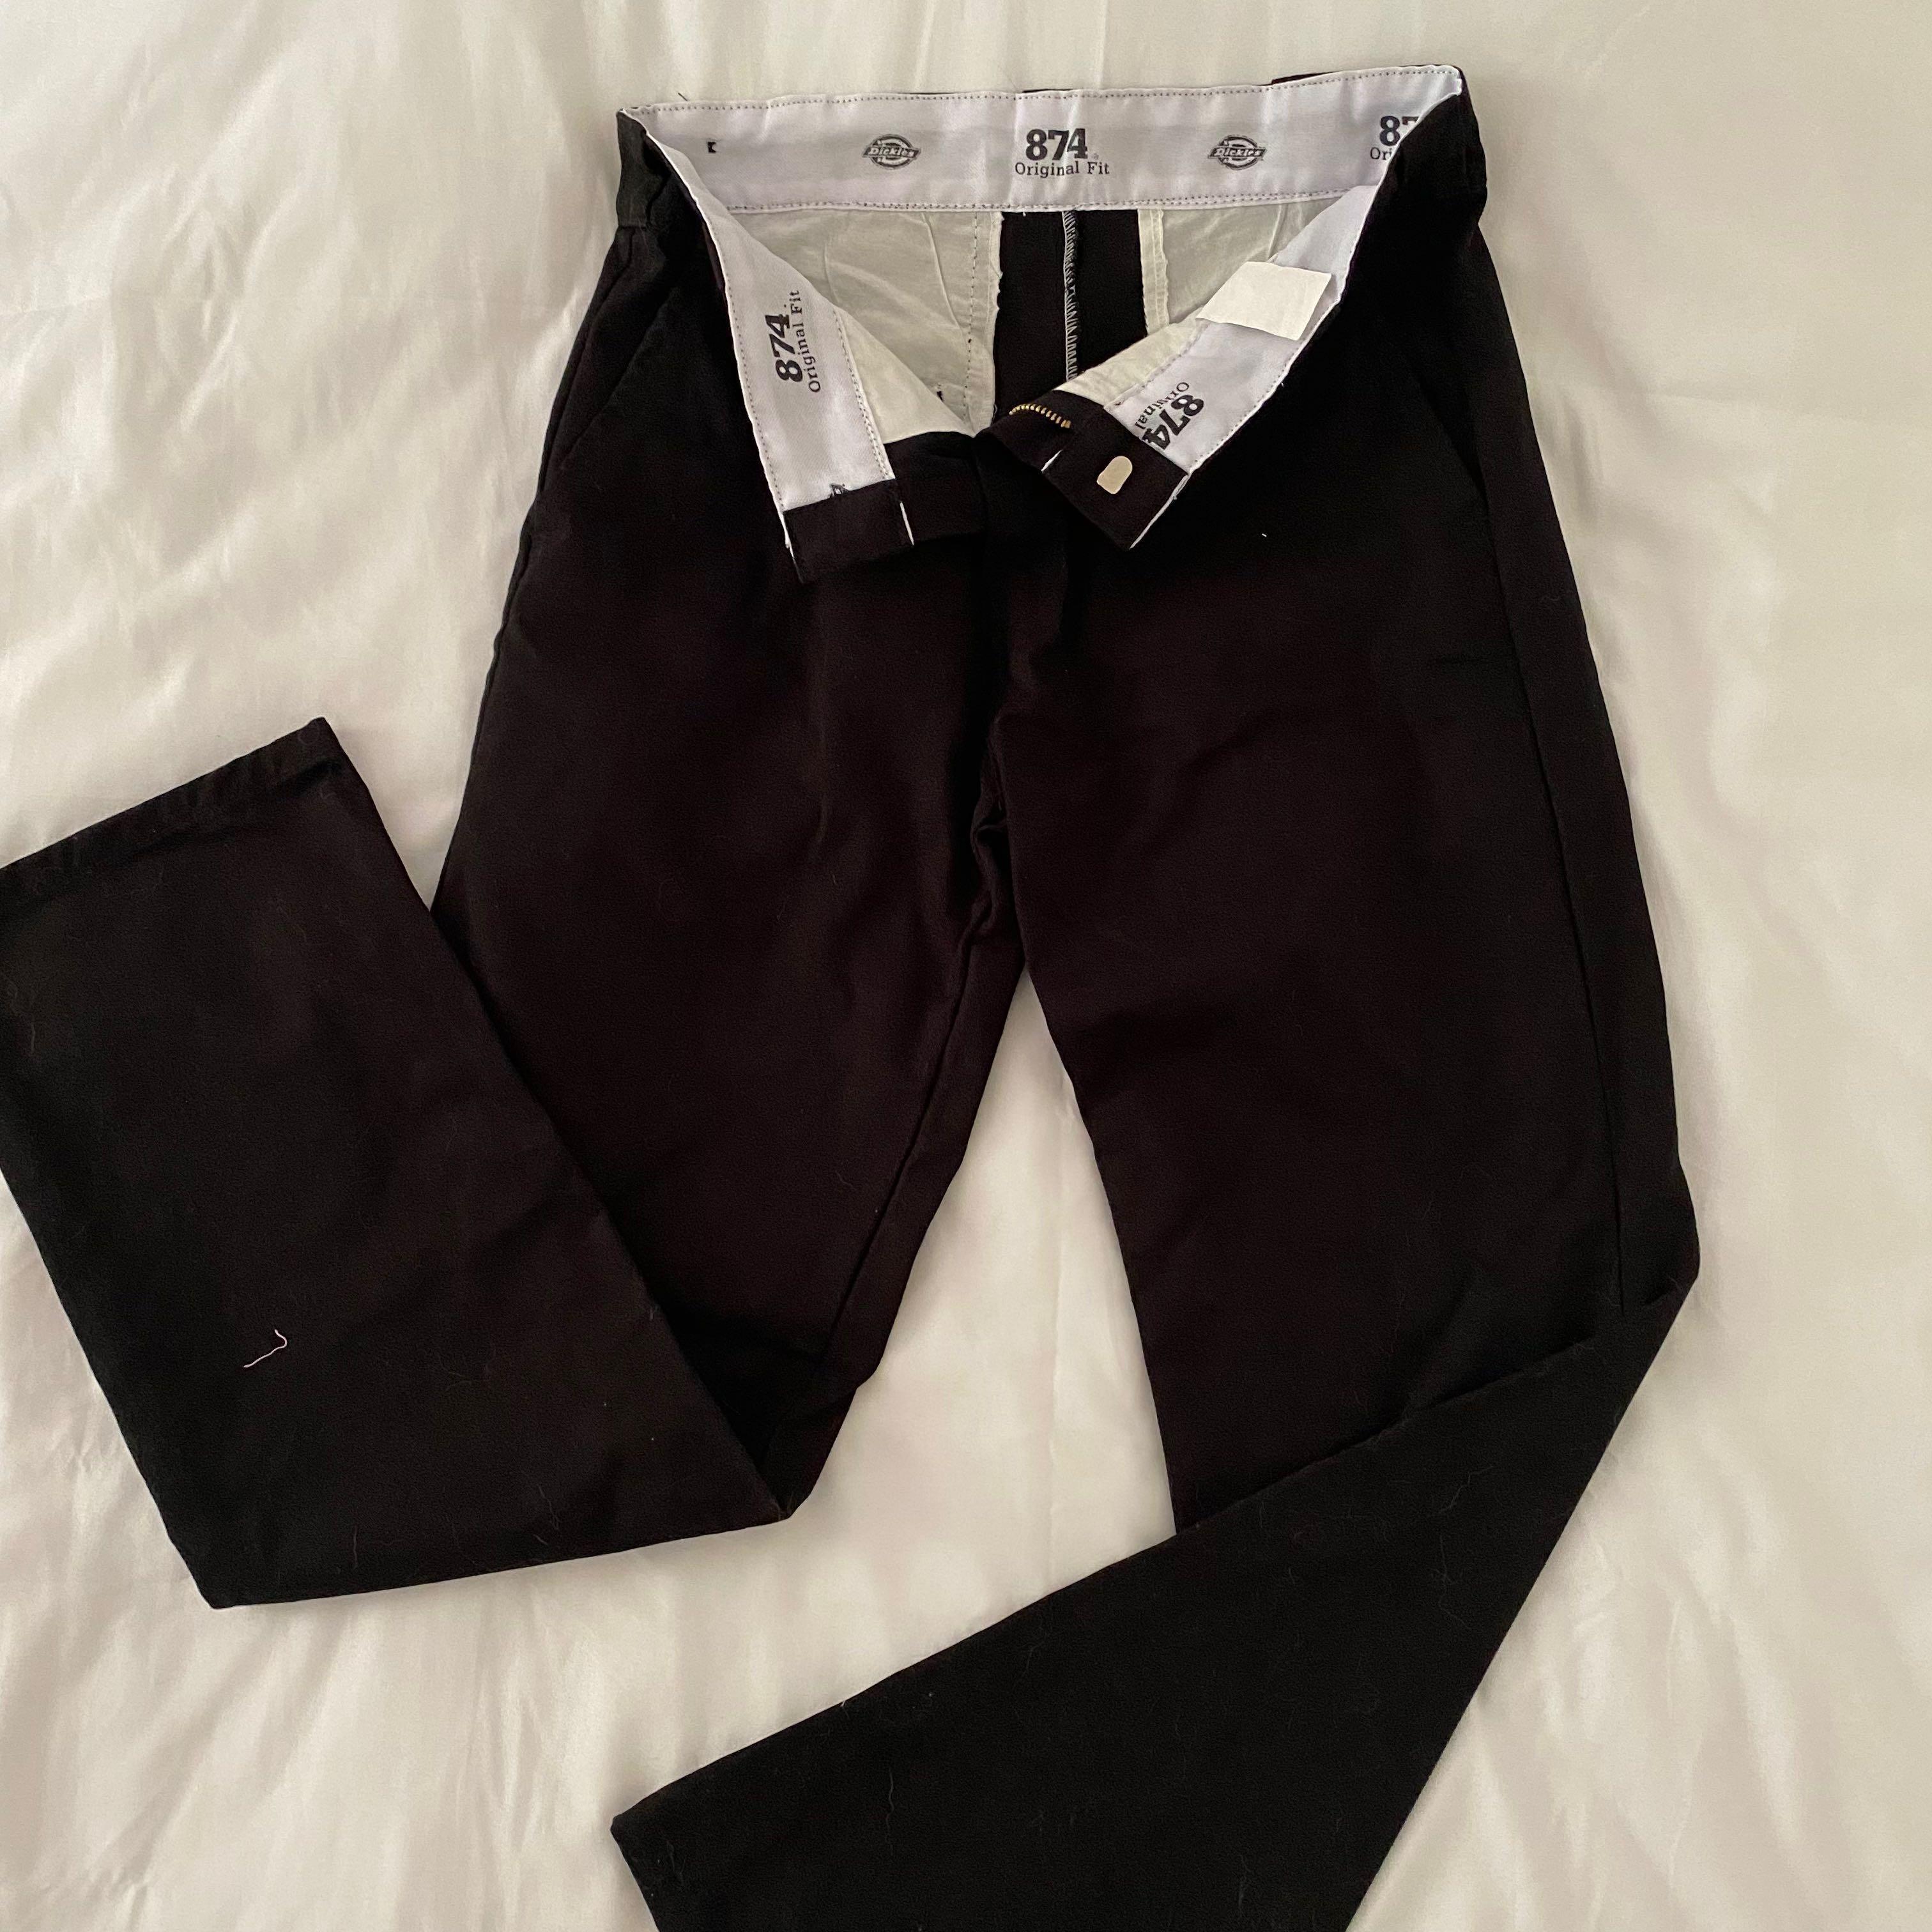 Dickies 874 original fit work pants Black size 30, Women's Fashion,  Bottoms, Other Bottoms on Carousell